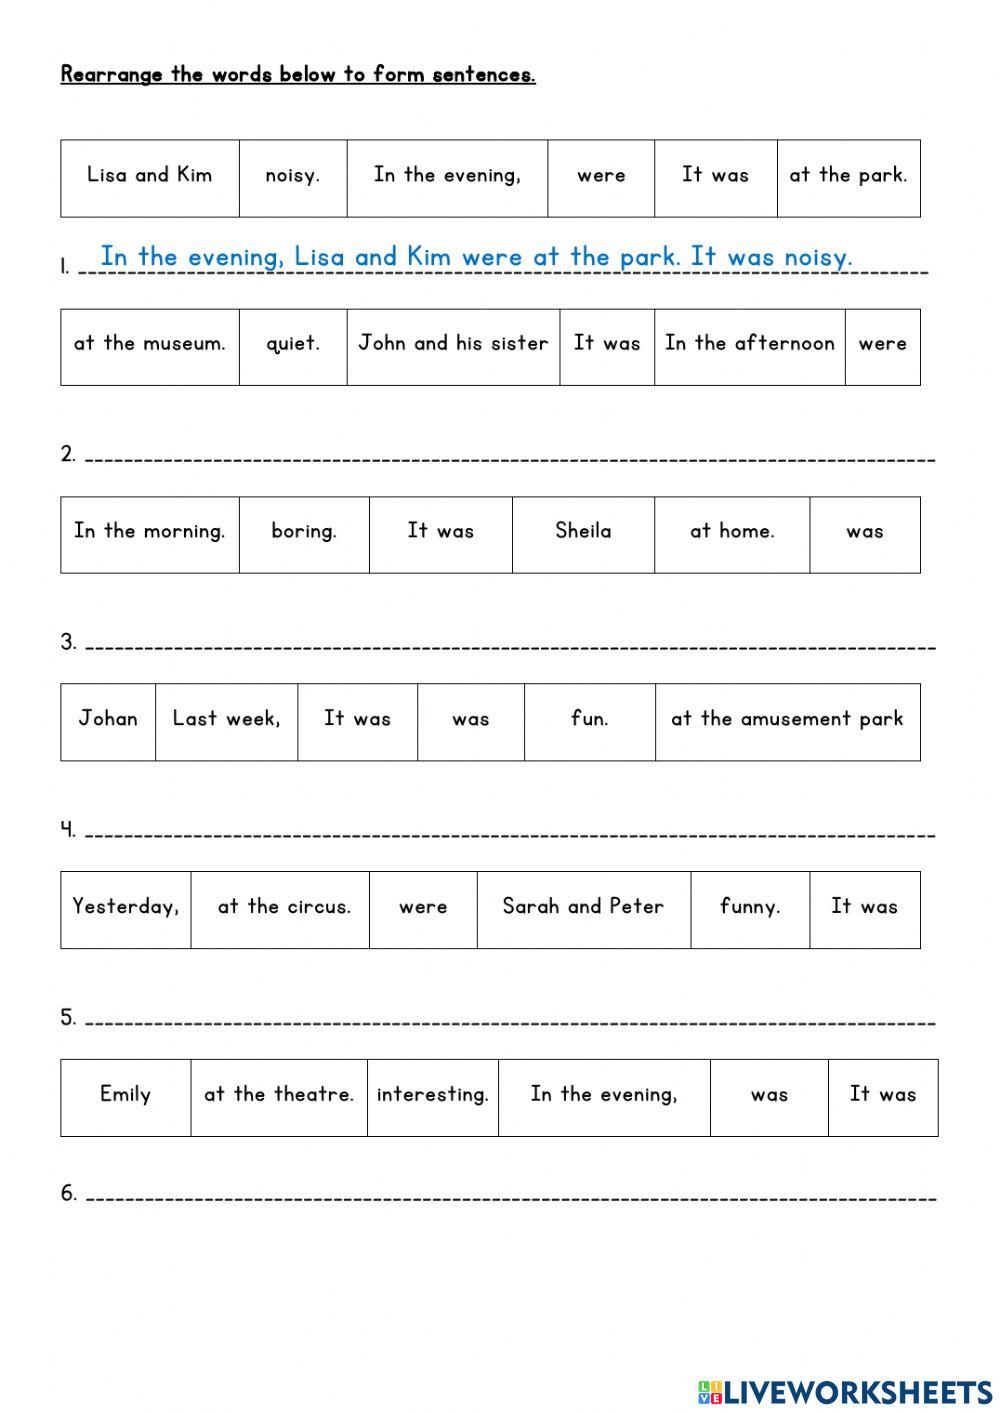 Get Smart Plus 3: Module 8 Where were you yesterday? (Rearranging Sentences)